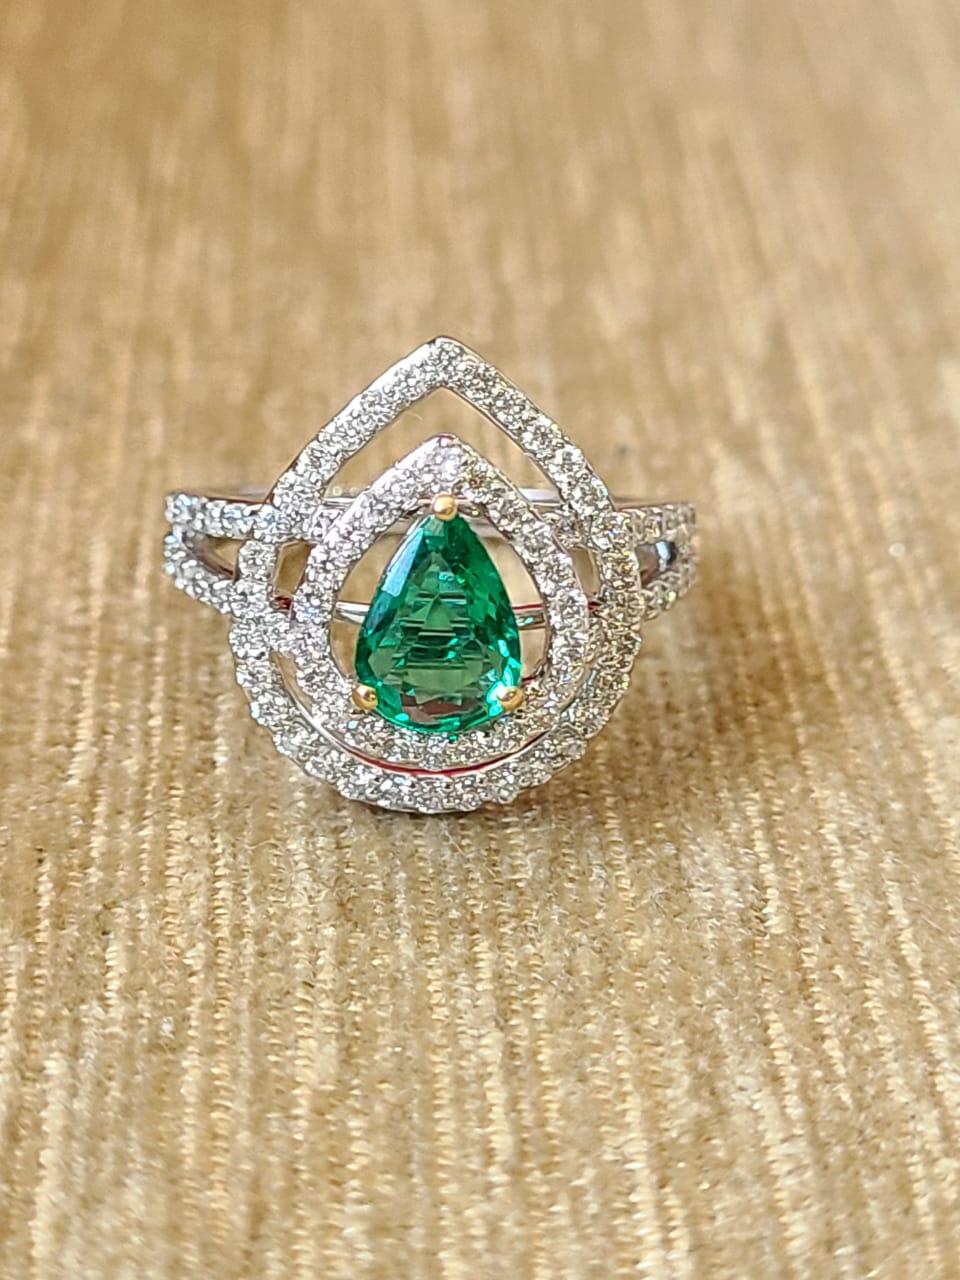 Pear Cut Set in 18K White Gold, Zambian Emerald & Diamonds Cocktail/ Engagement Ring